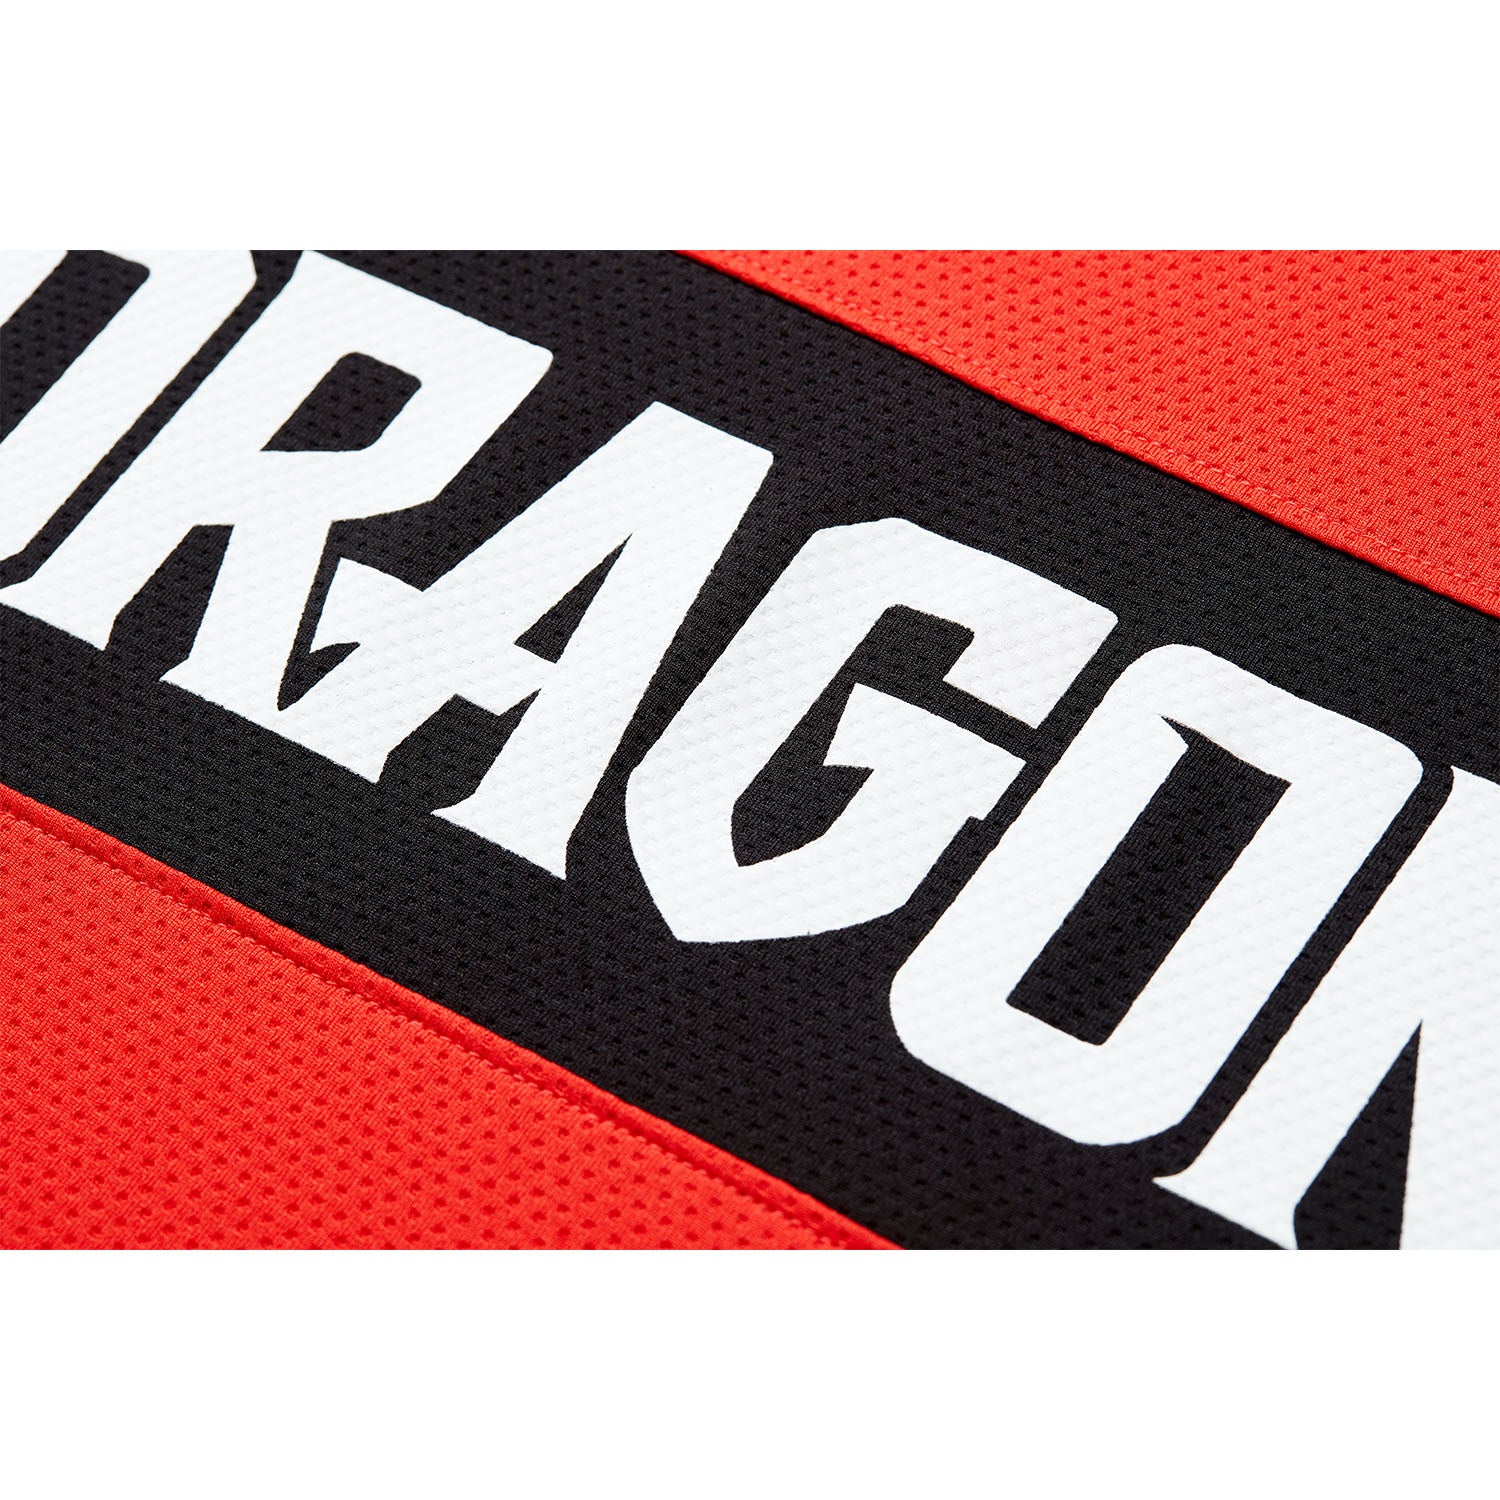 Shanghai Dragons Red Jersey - Team Name View